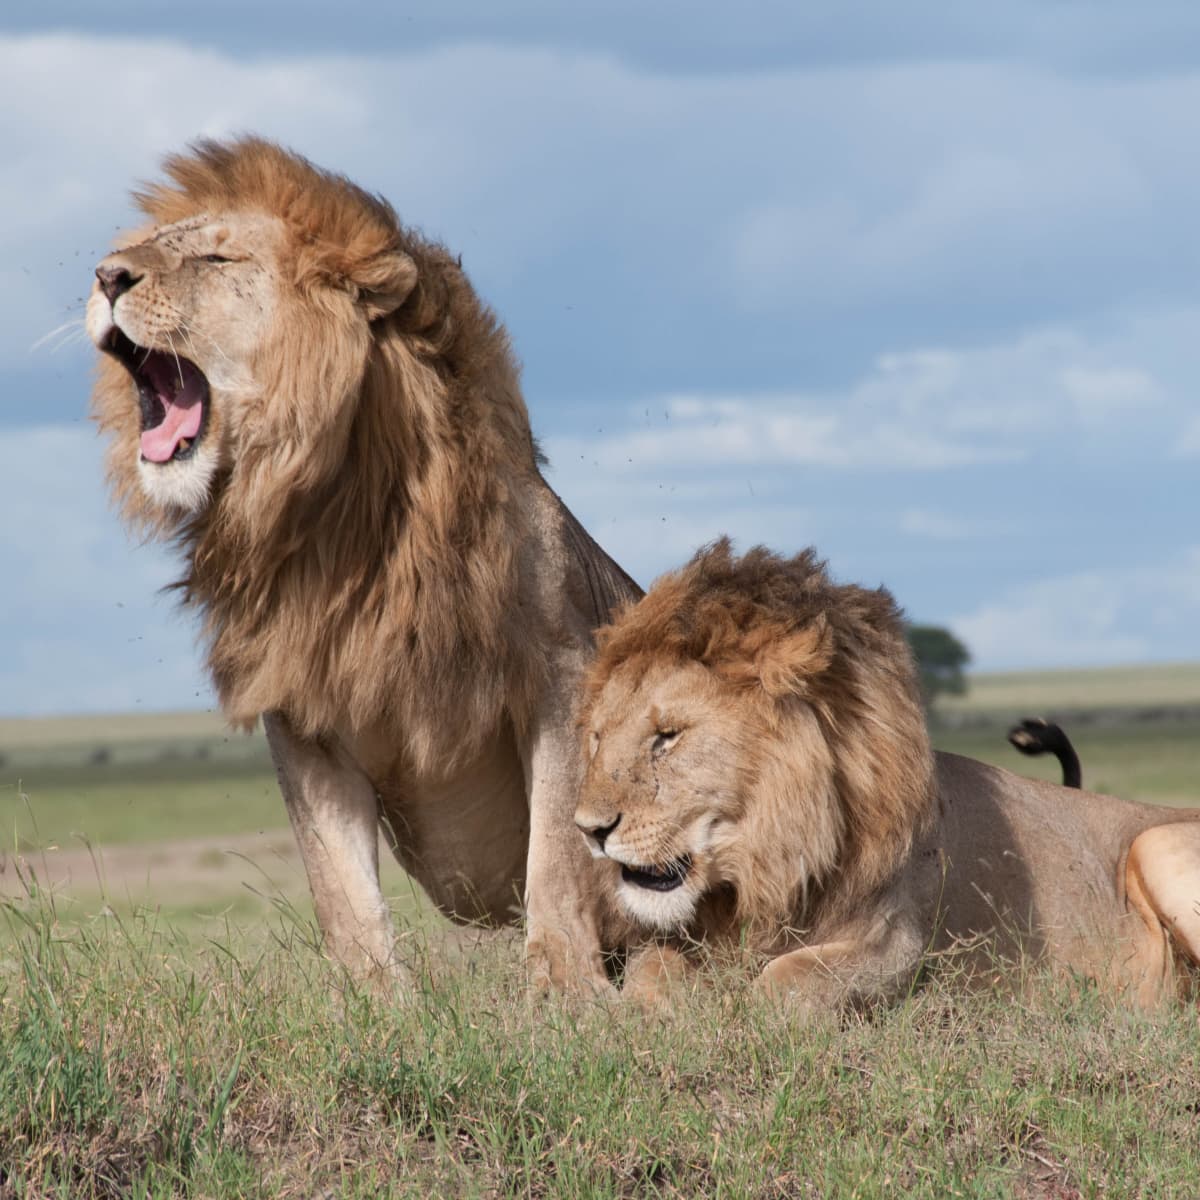 How Do Lions Hunt and Kill Their Prey? - Owlcation